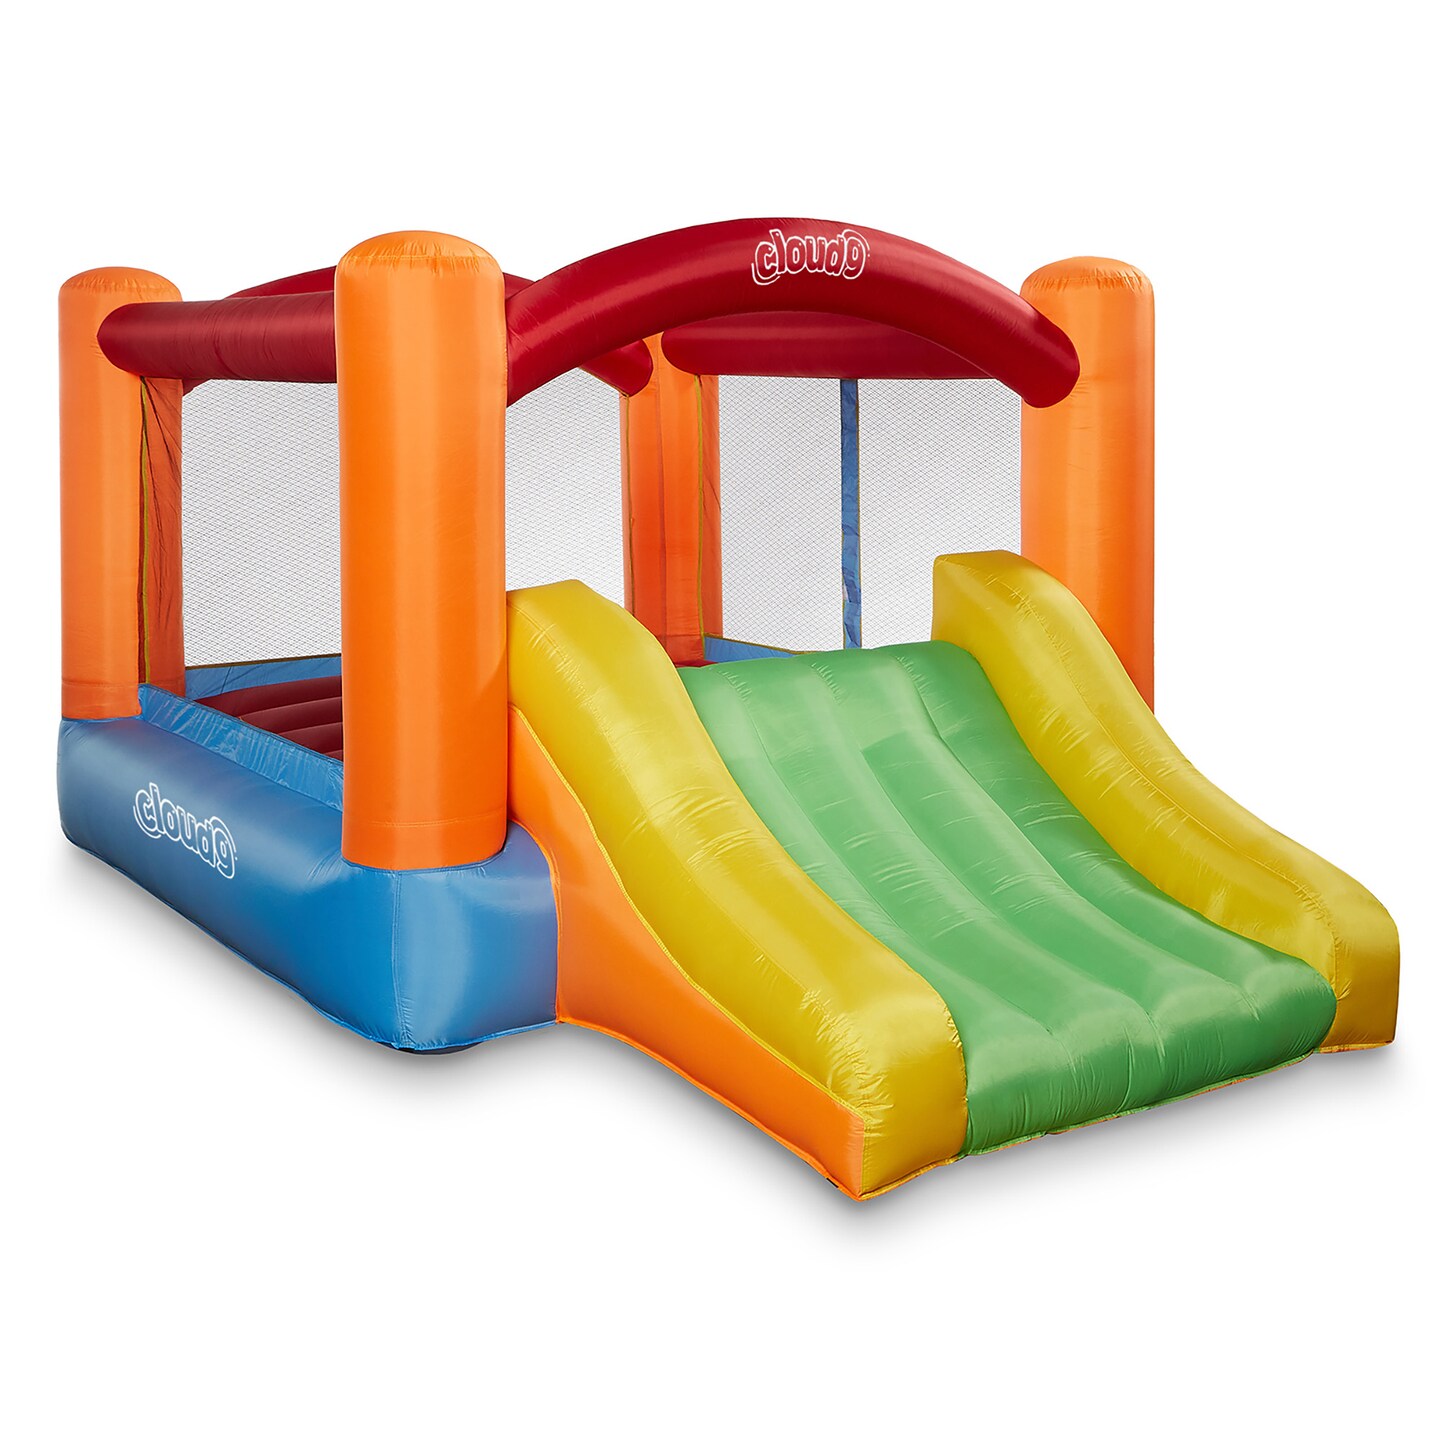 Cloud 9 Inflatable Bounce House and Blower, Bouncer for Kids with Fun Slide, Includes Stakes and Repair Patches